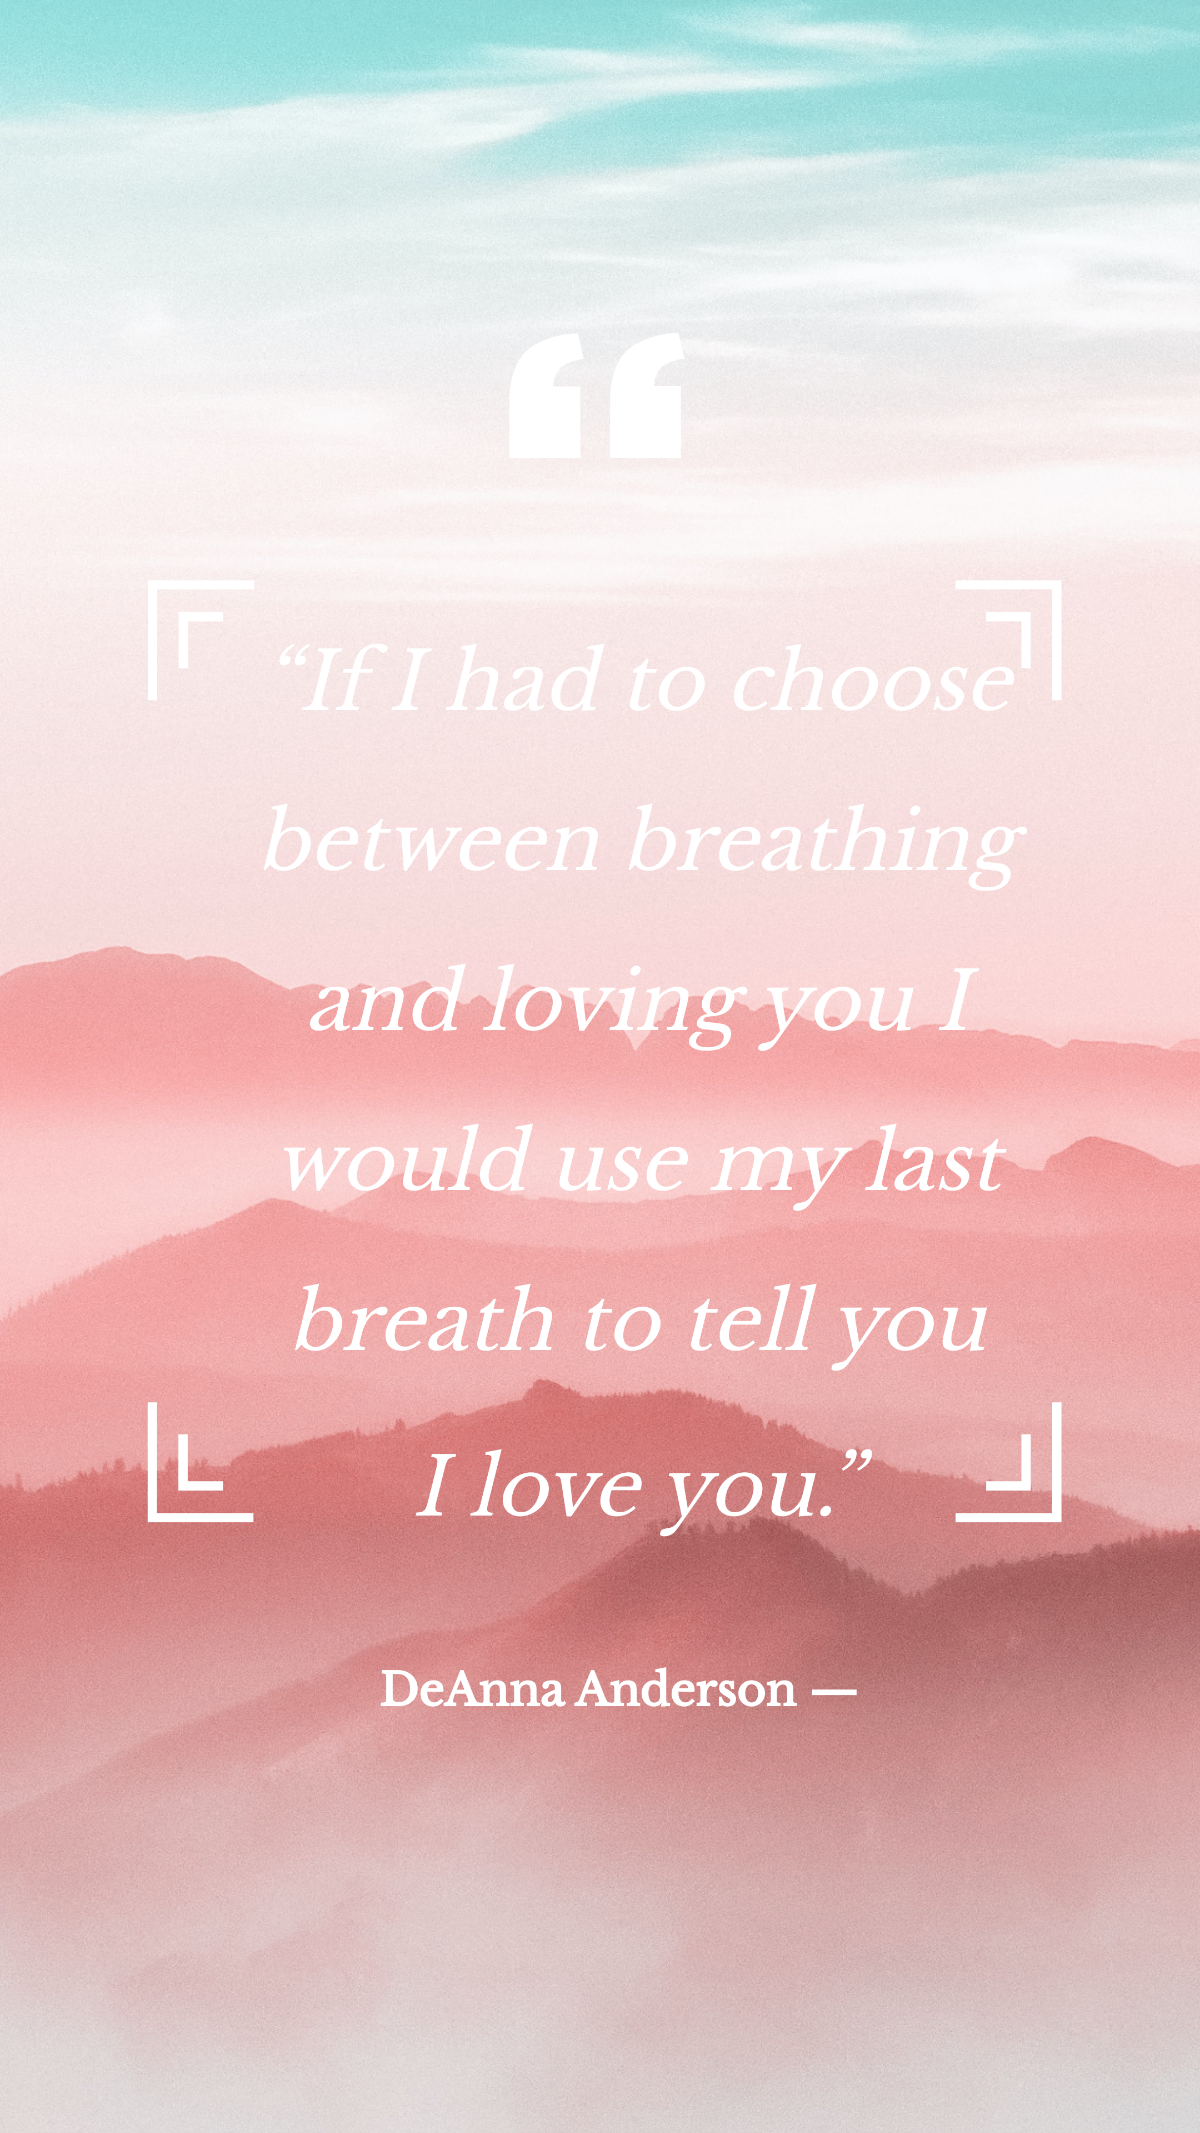 DeAnna Anderson — “If I had to choose between breathing and loving you I would use my last breath to tell you I love you.” Template